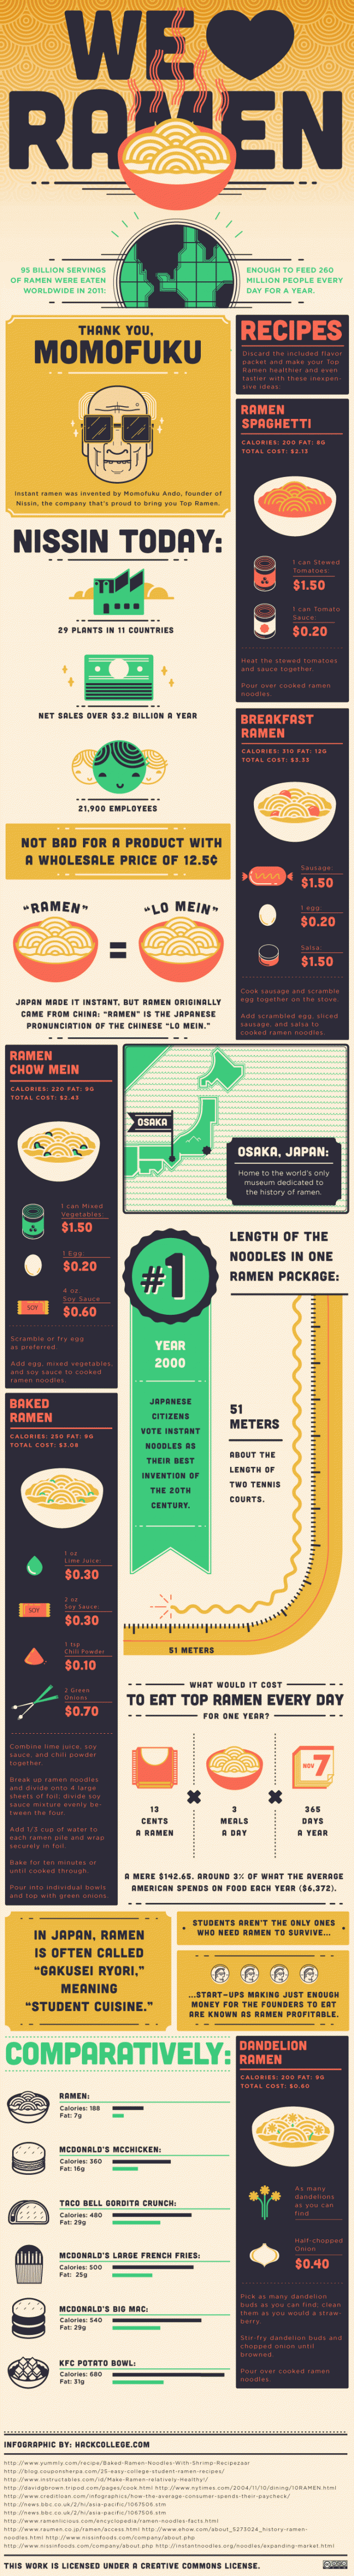 Interesting Facts About Ramen